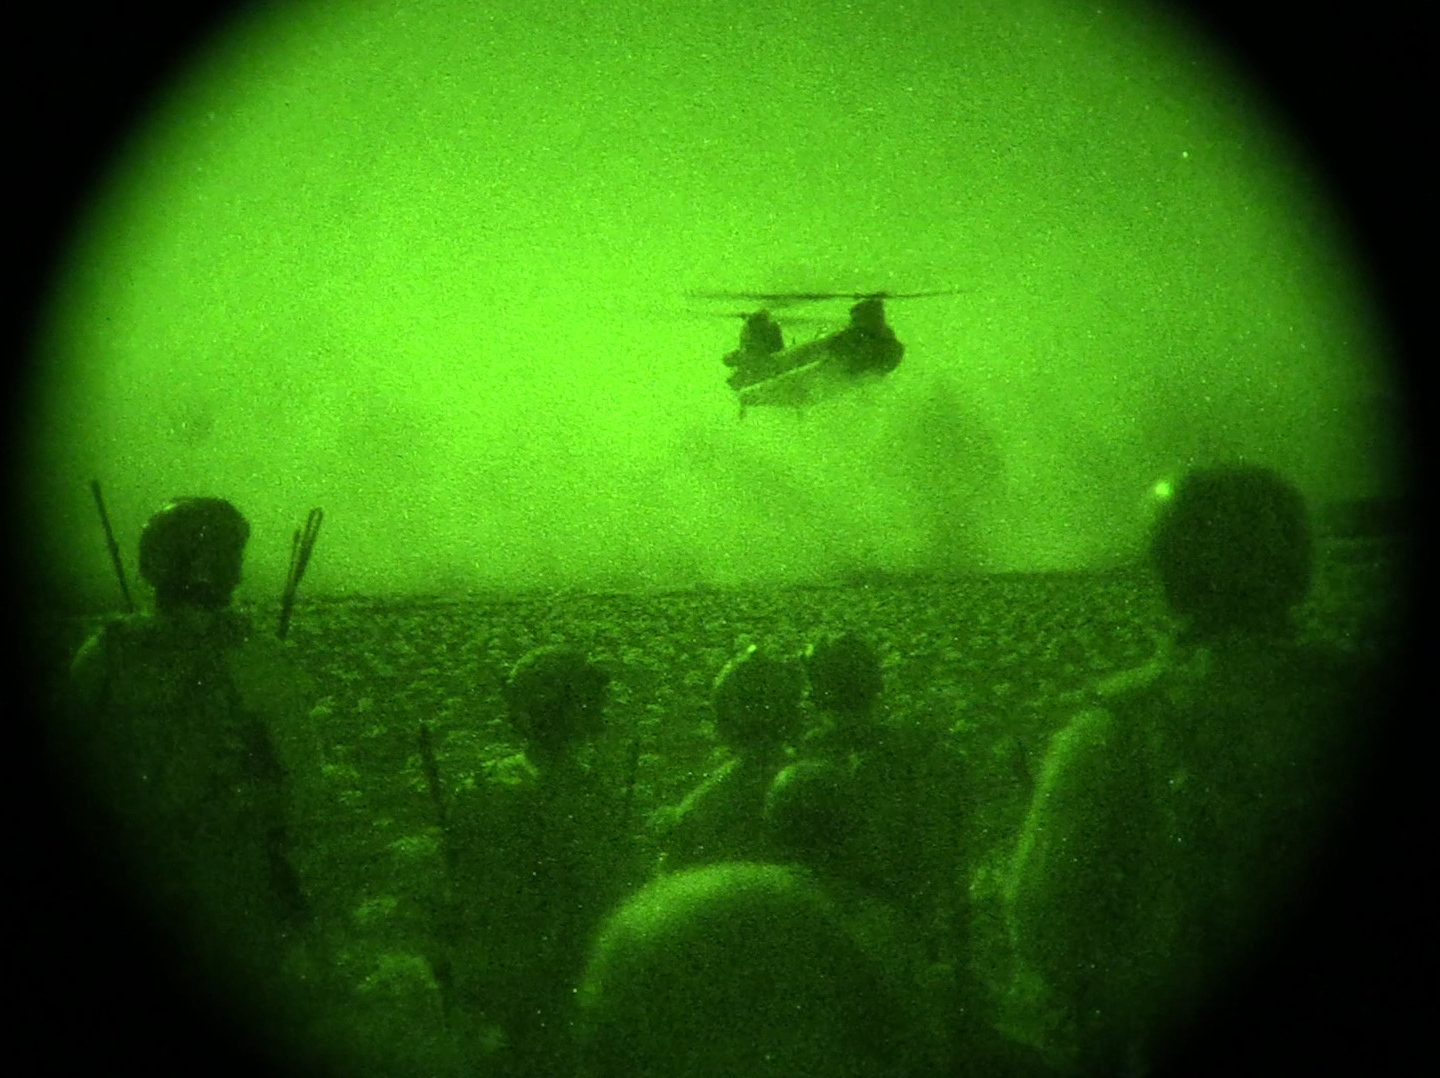 Afghan Special Security Forces and U.S. Special Operations Forces await exfiltration after night raids on compounds used by Taliban irreconcilables to plan and facilitate attacks in western Balkh province